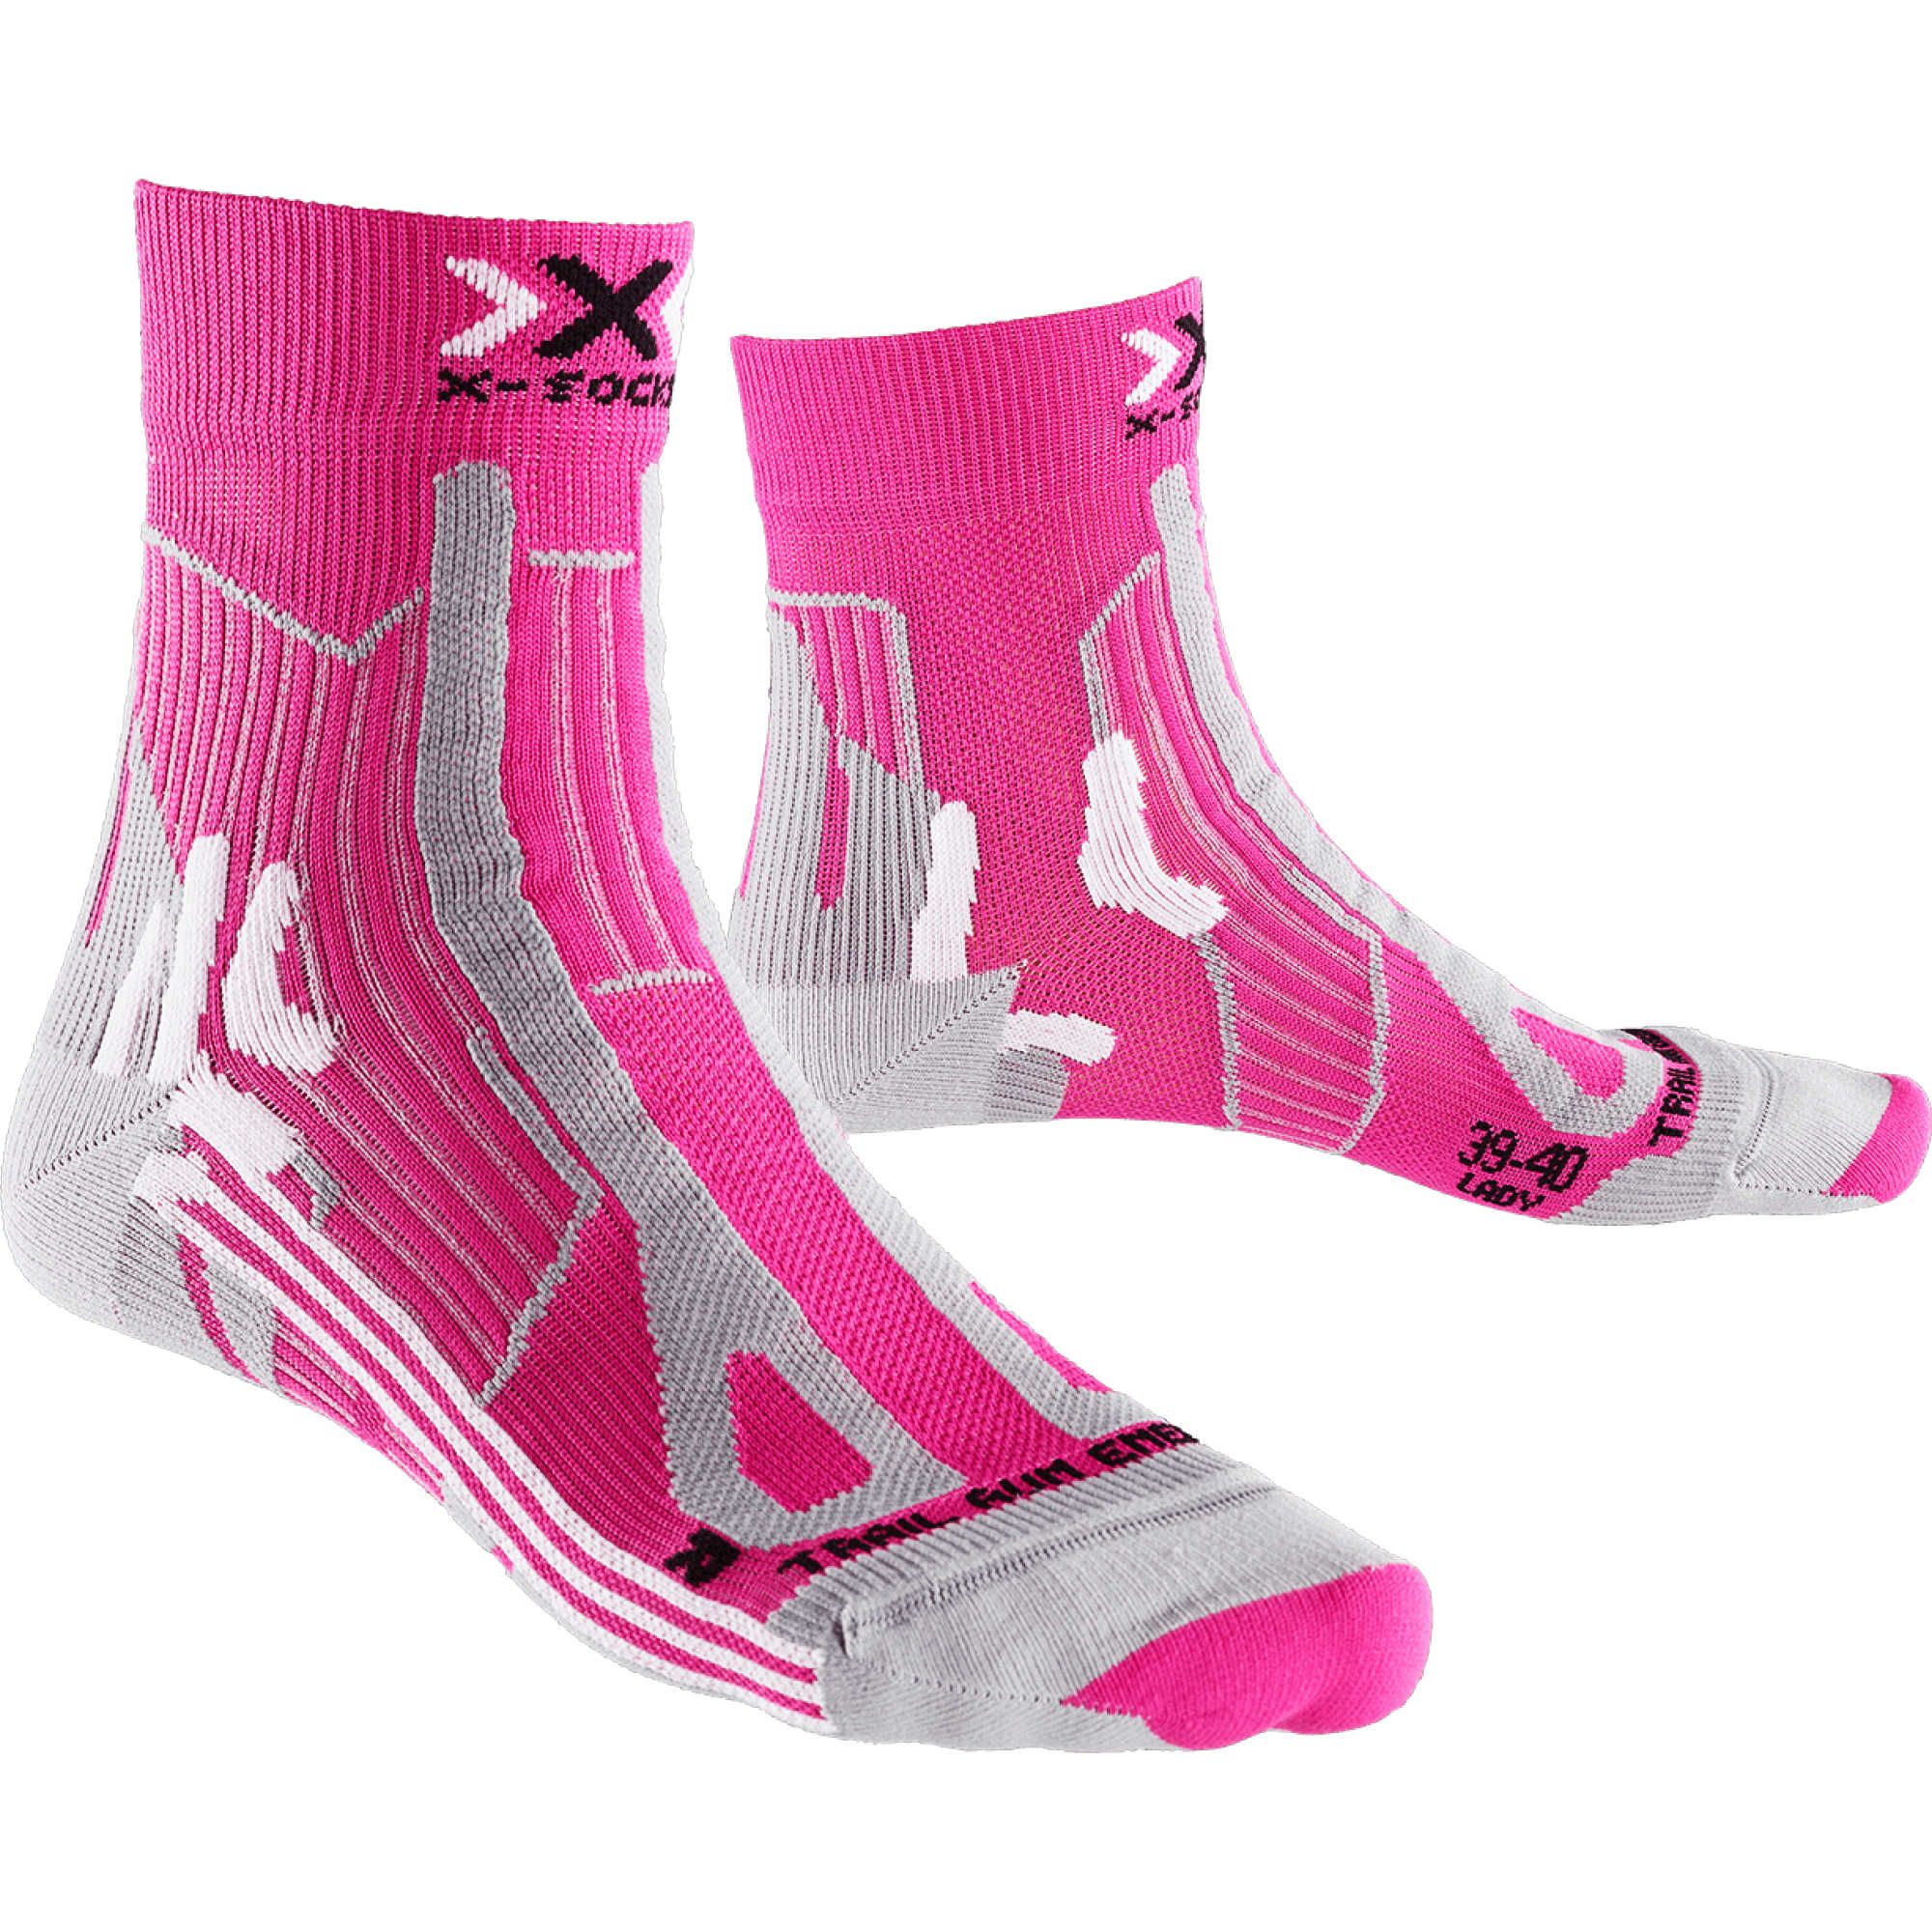 Chaussettes Femme Trail Energy Lady - Pink/Pearl Grey